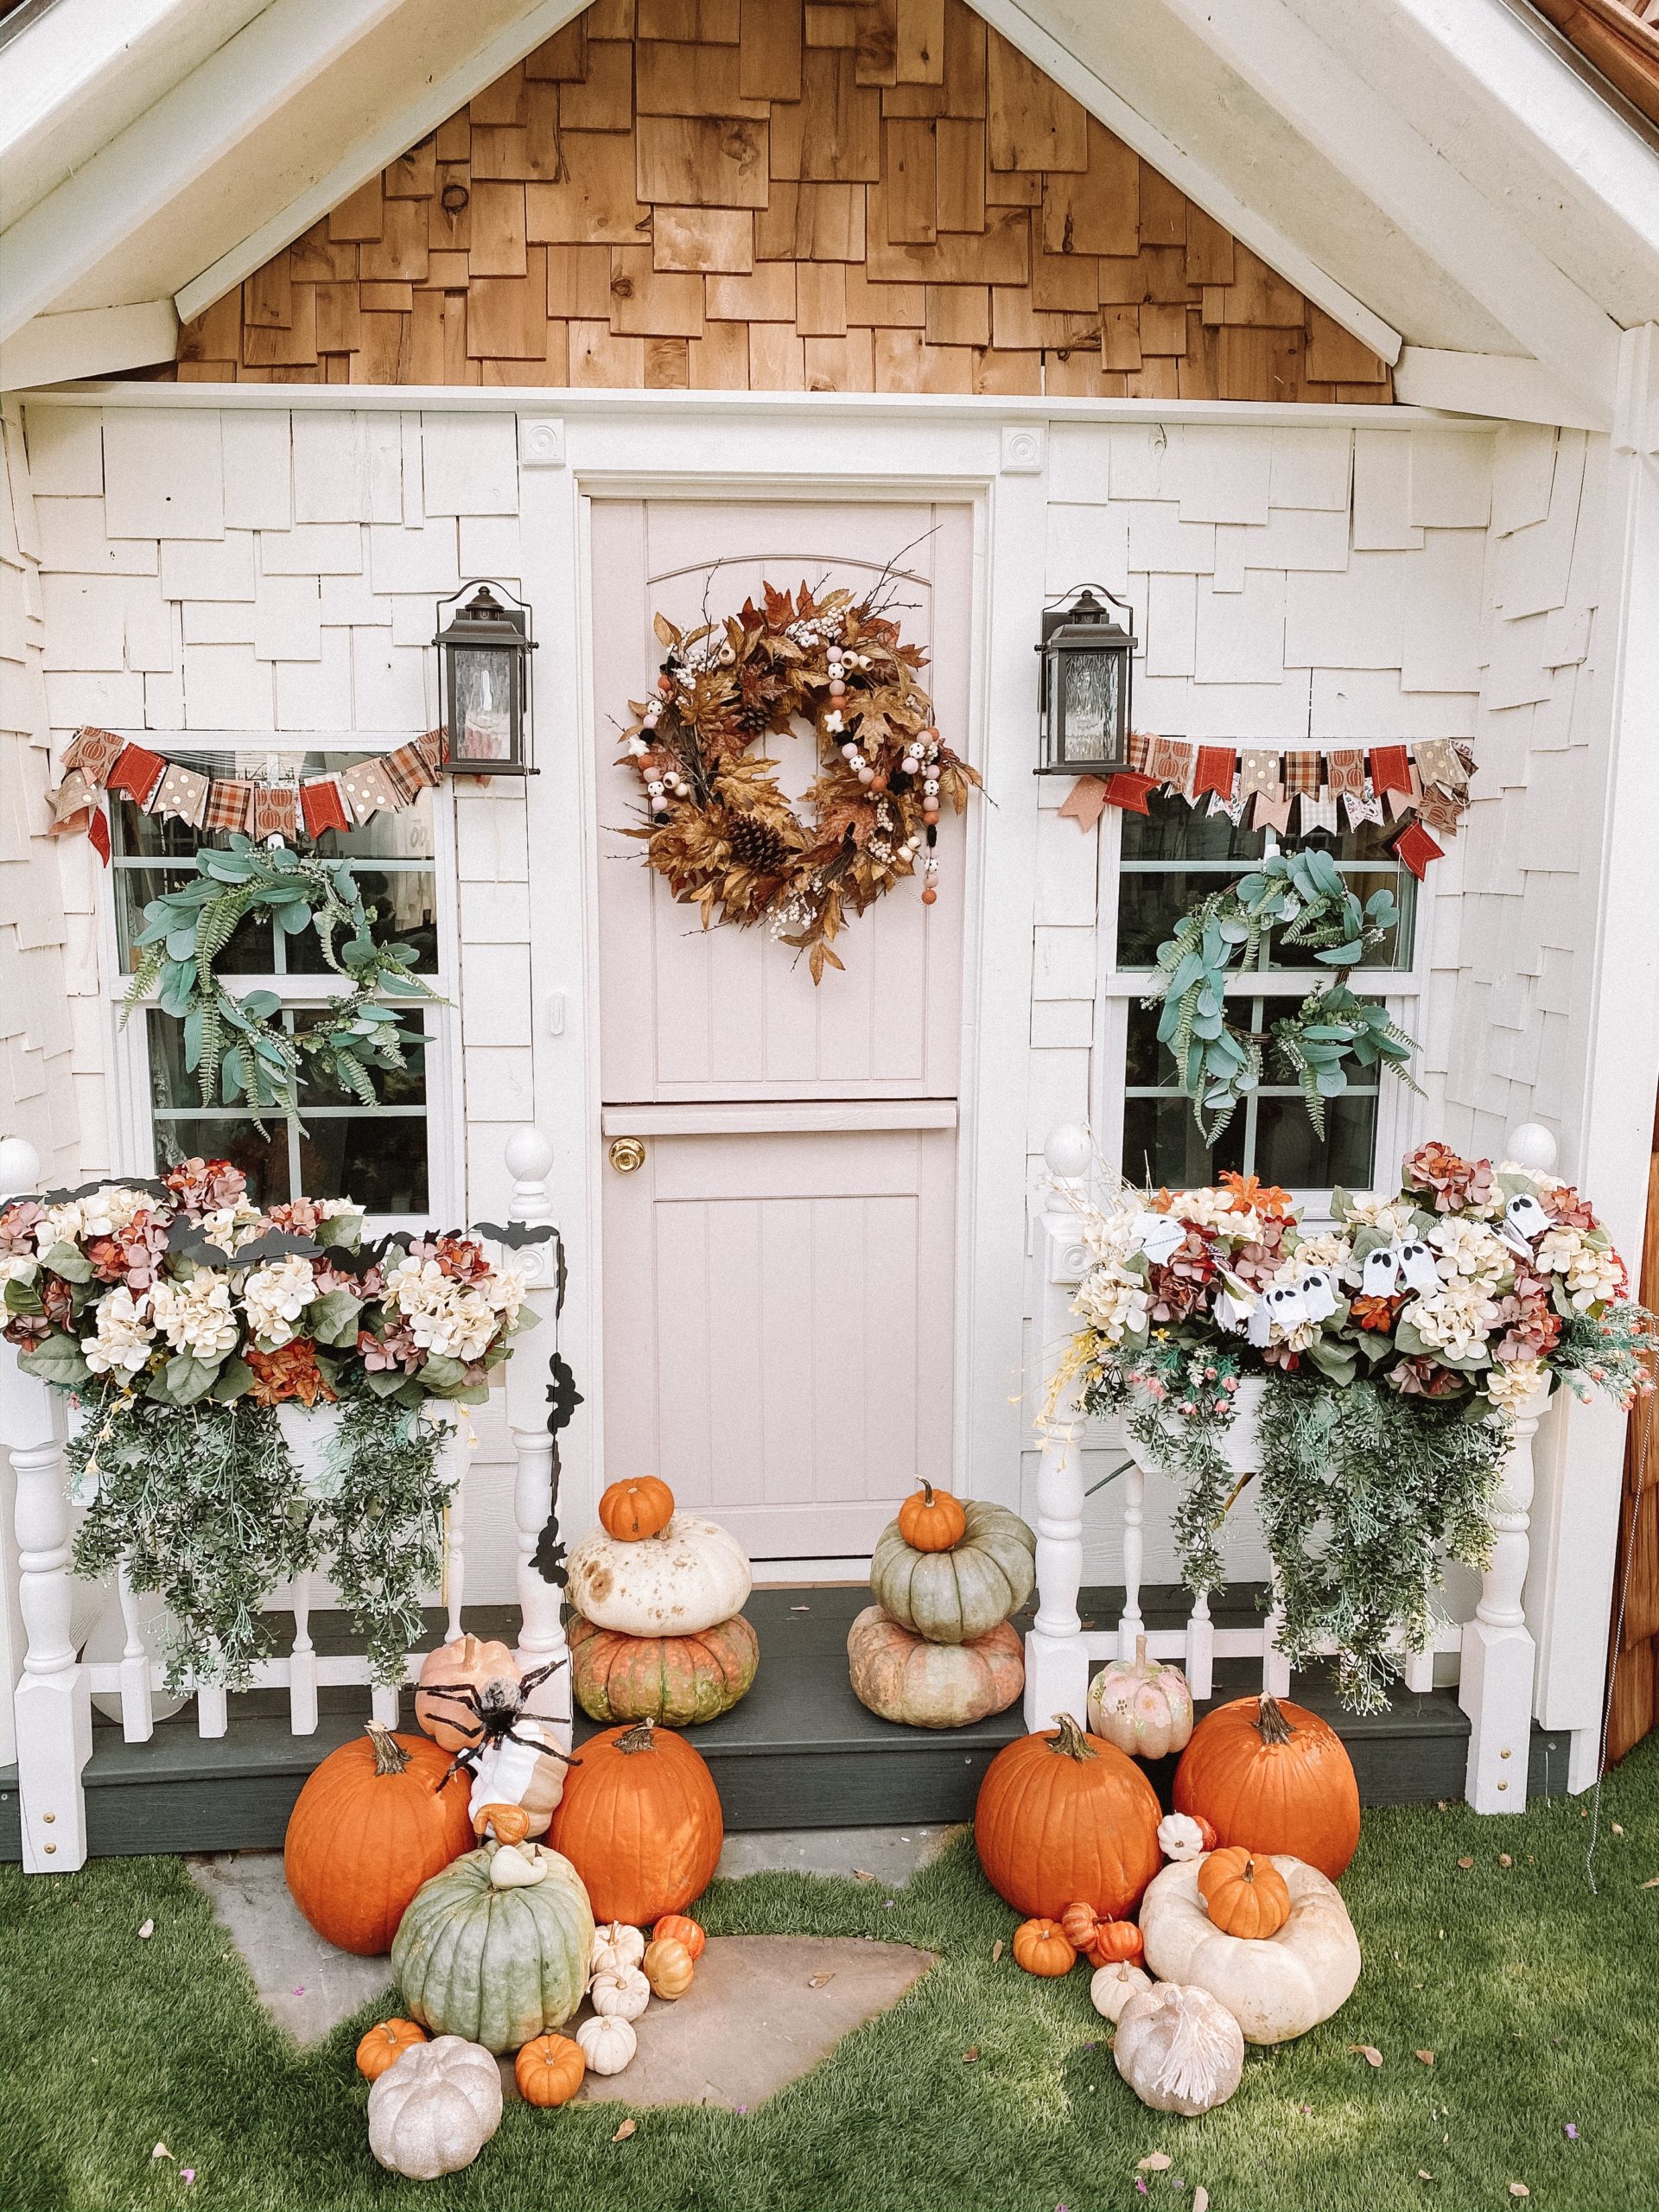 Playhouse Fall Decor - Casey Wiegand of The Wiegands